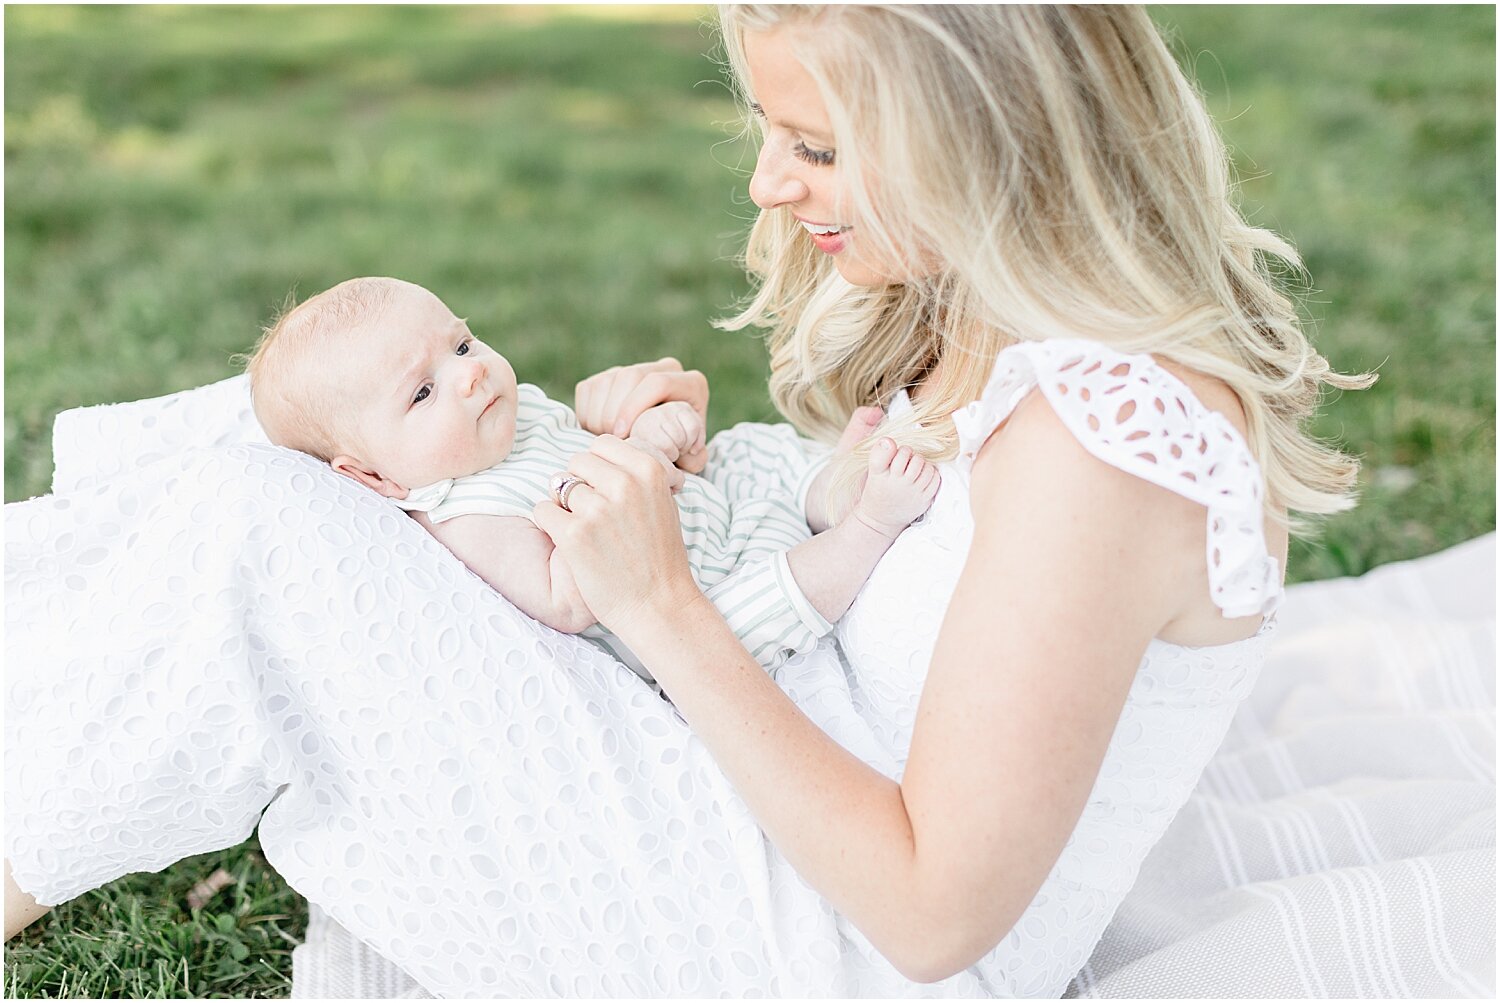 Mom and son at outdoor newborn session at Waveny Park with New Canaan Newborn Photographer, Kristin Wood Photography.